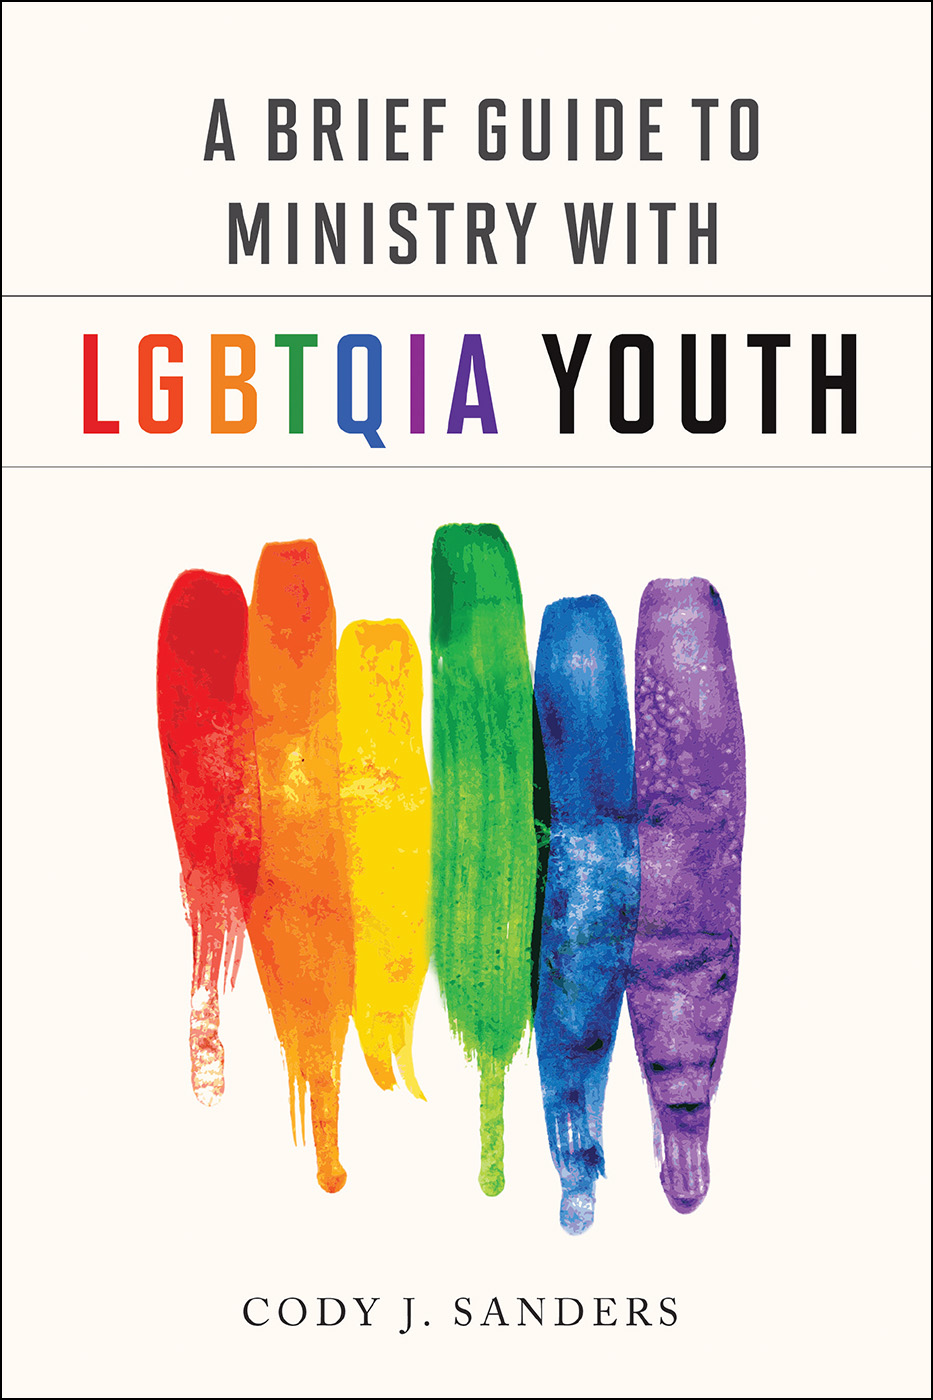 A Brief Guide to Ministry with LGBTQIA Youth